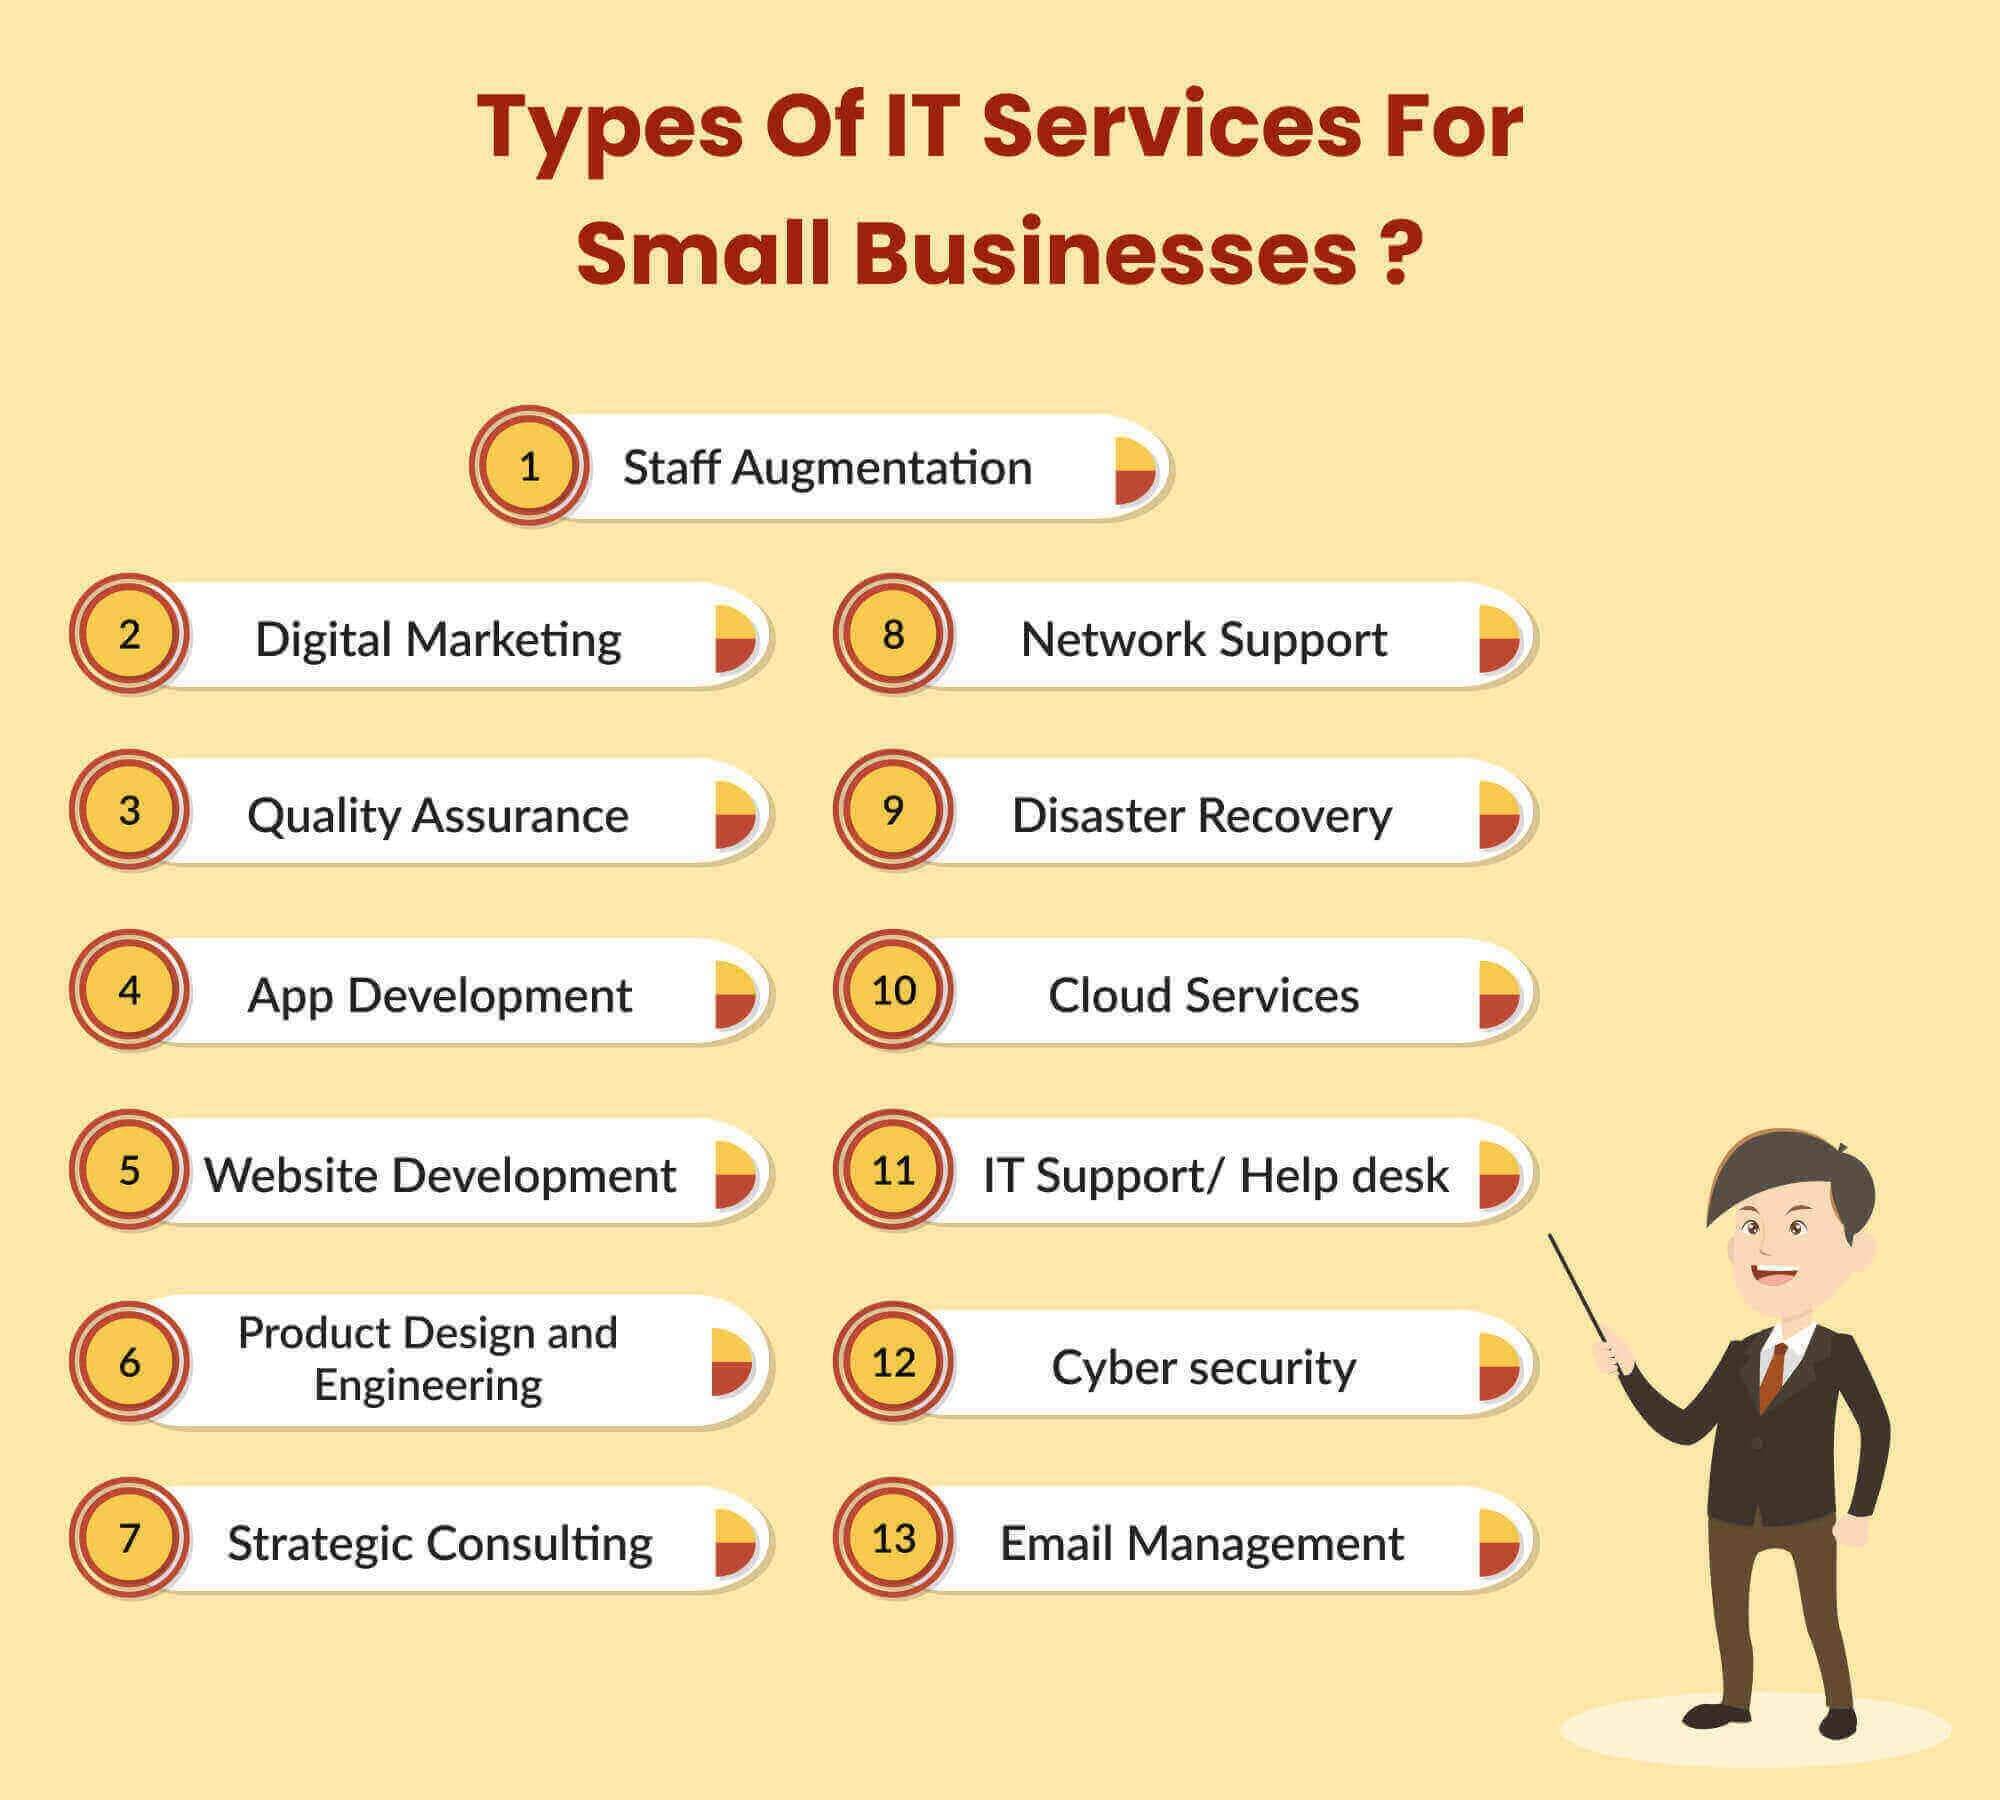 Types-Of-IT-Services-For-Small-Businesses